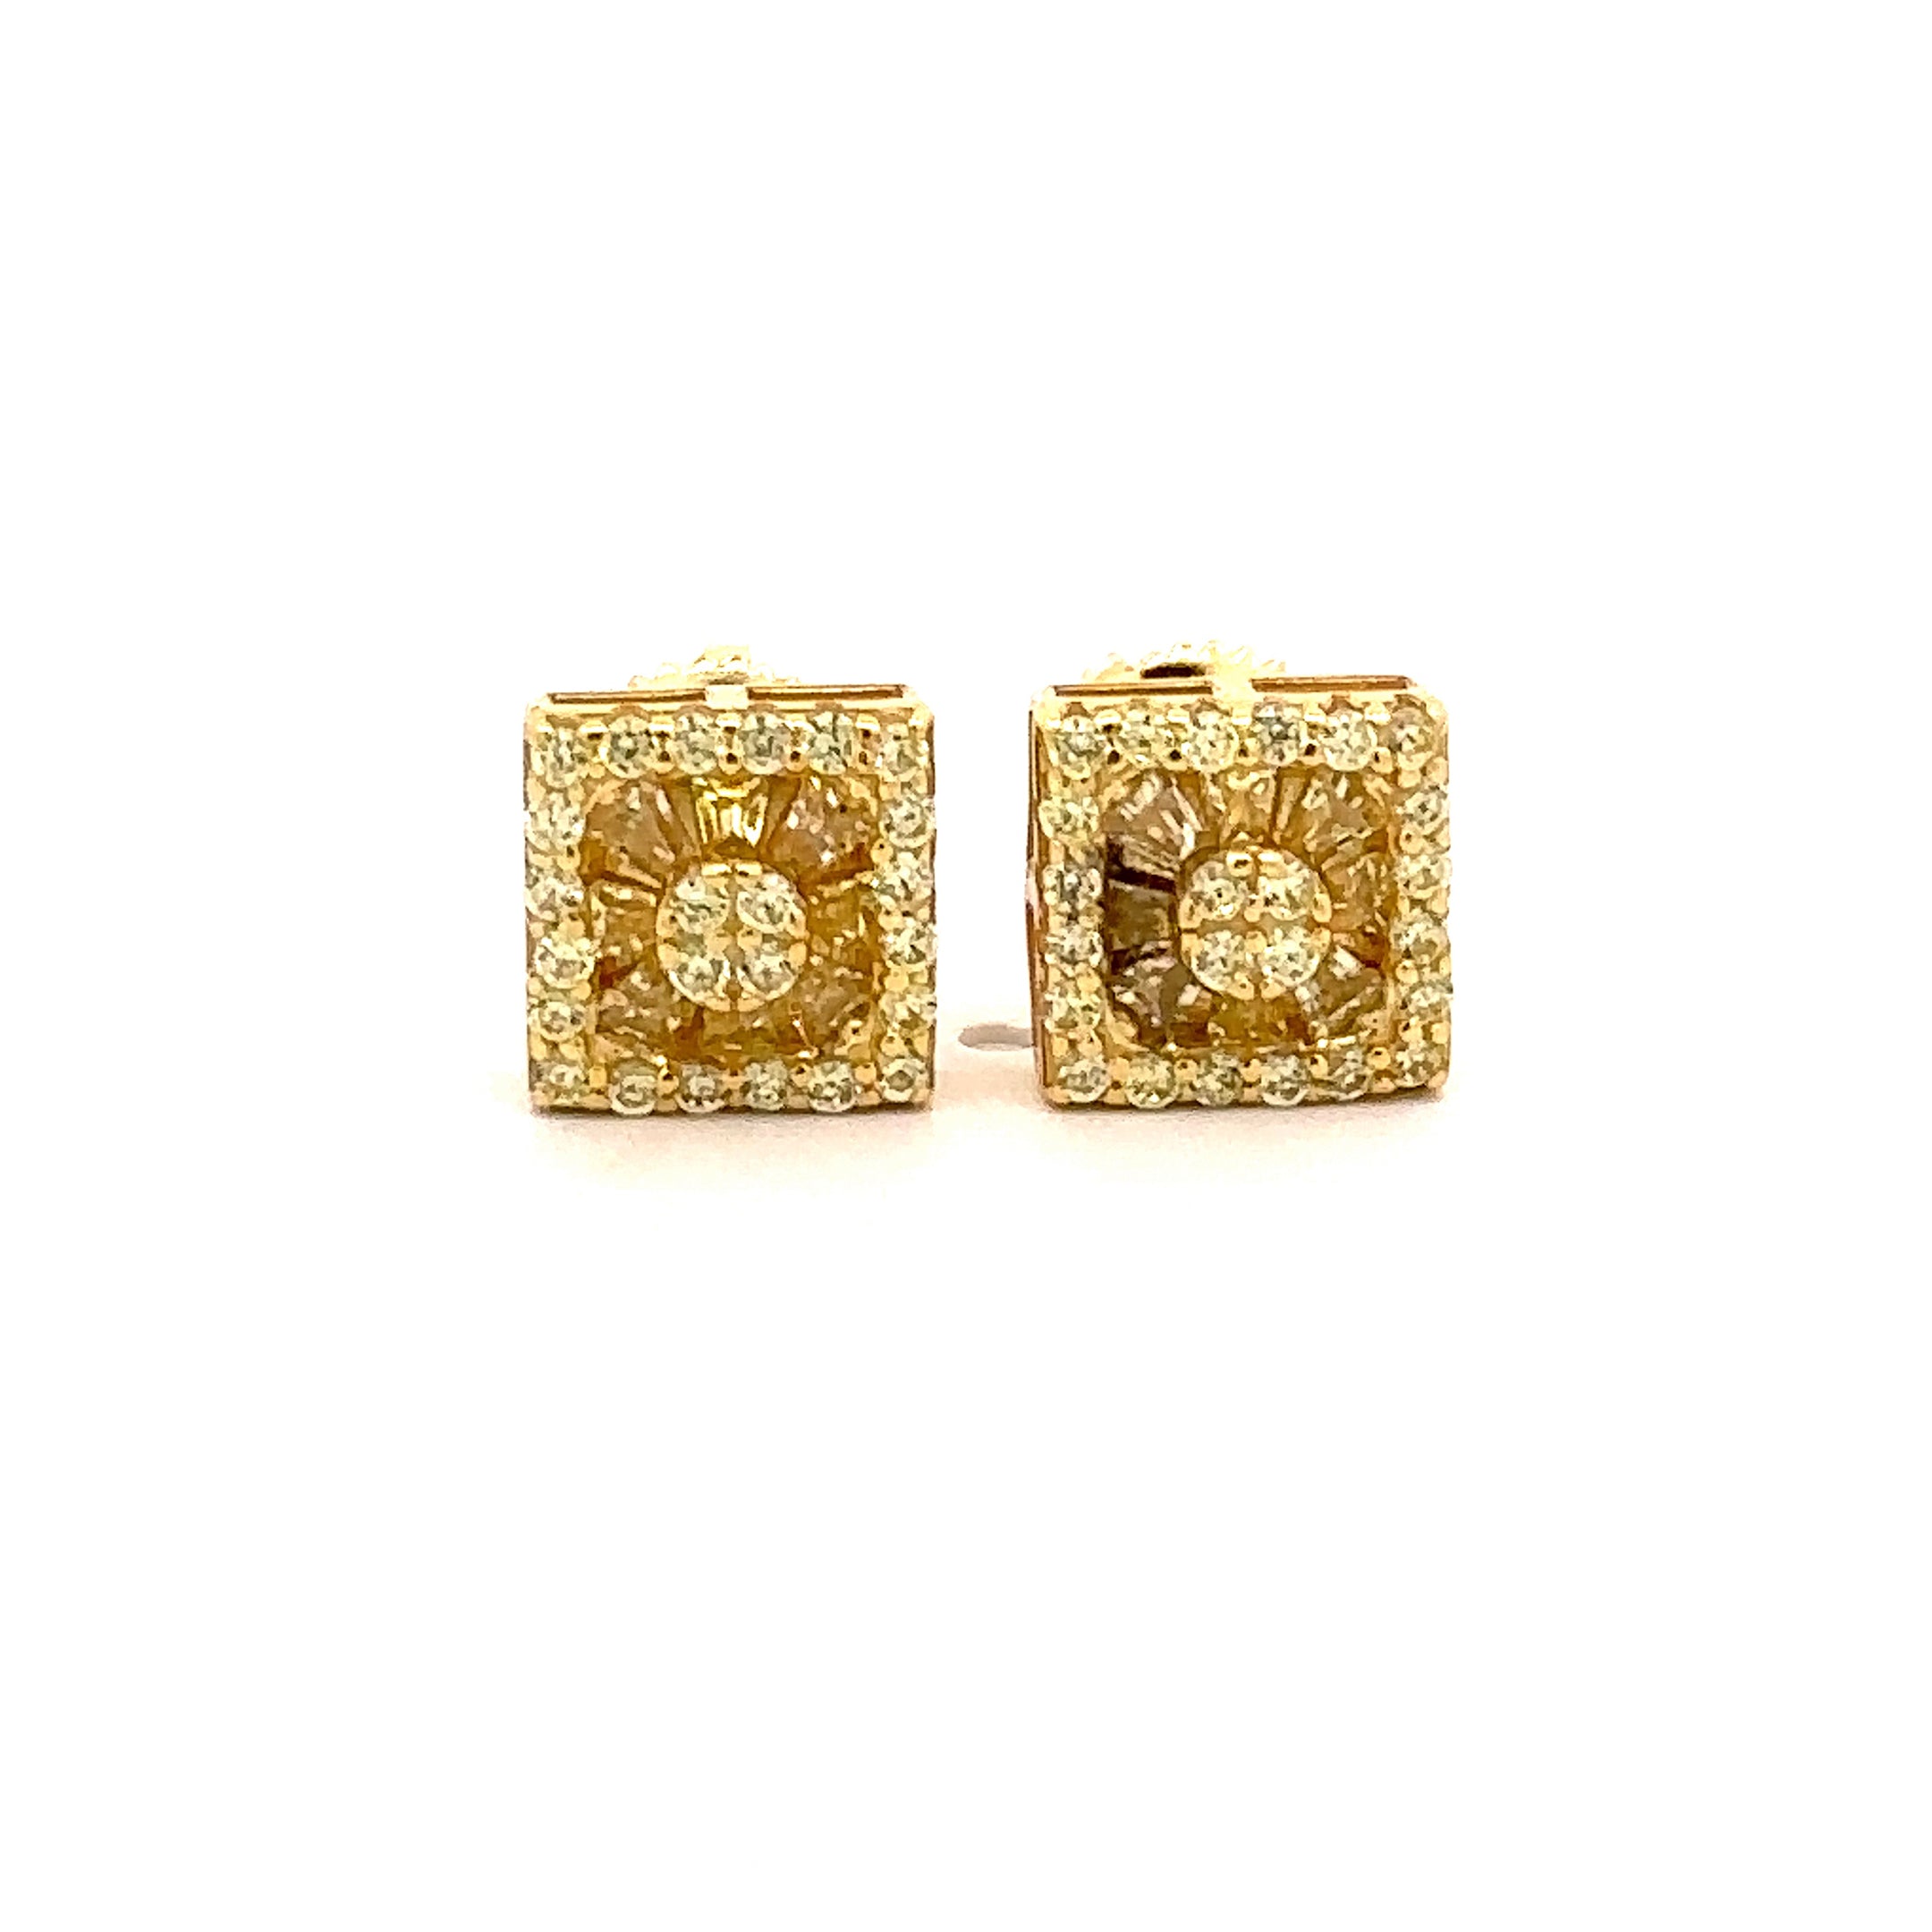 ISADORA 925 CZ YELLOW ICED OUT EARRINGS | 9219524